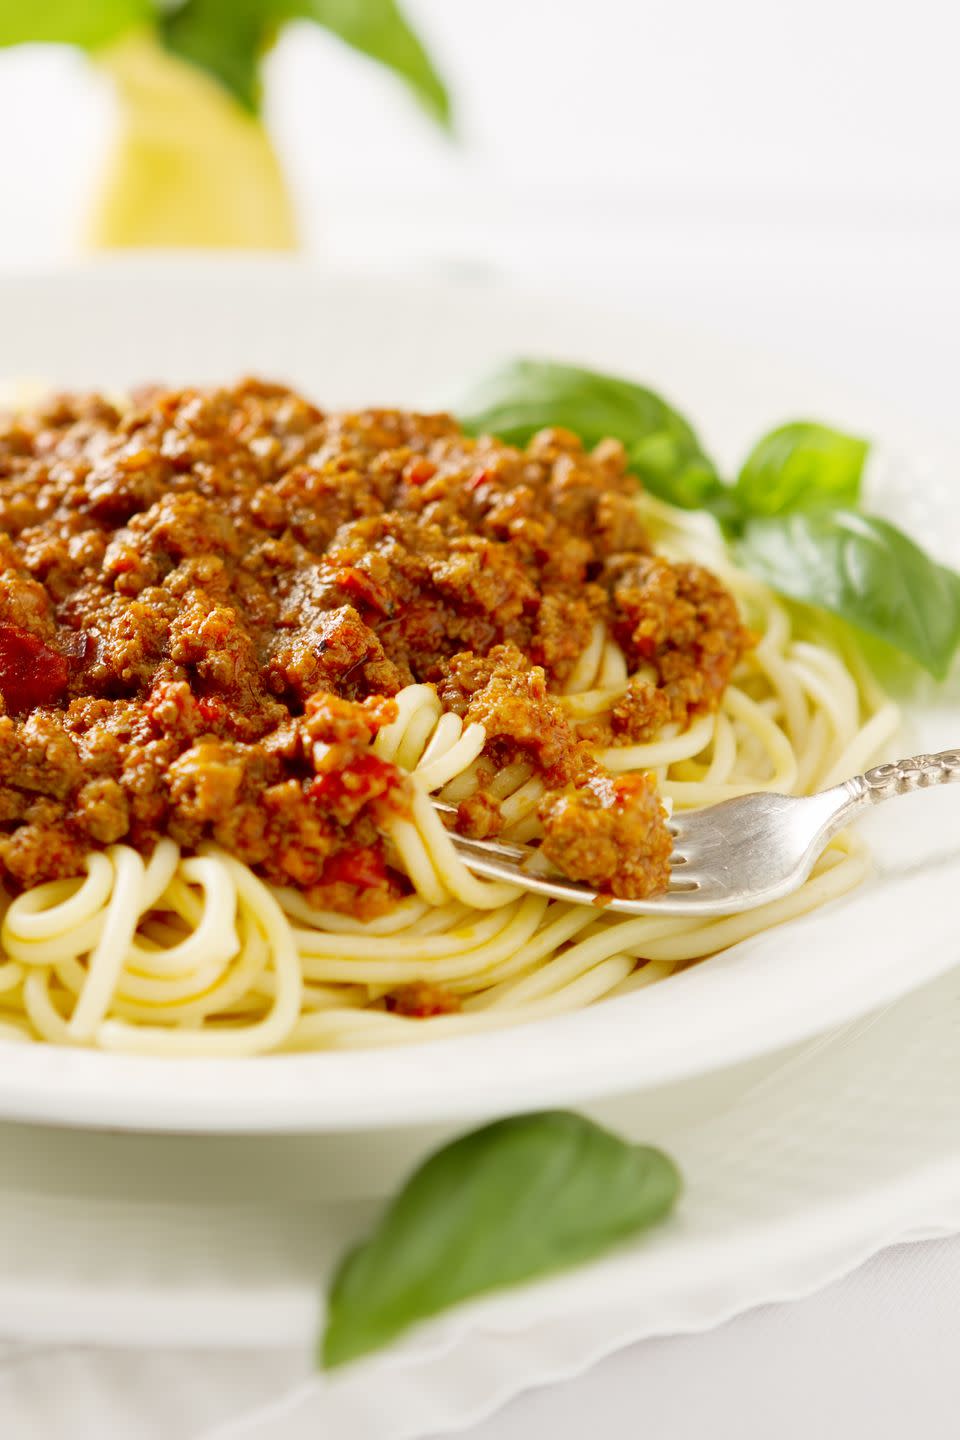 WITH YOUR MOM: Cook your grandma's spaghetti bolognese.